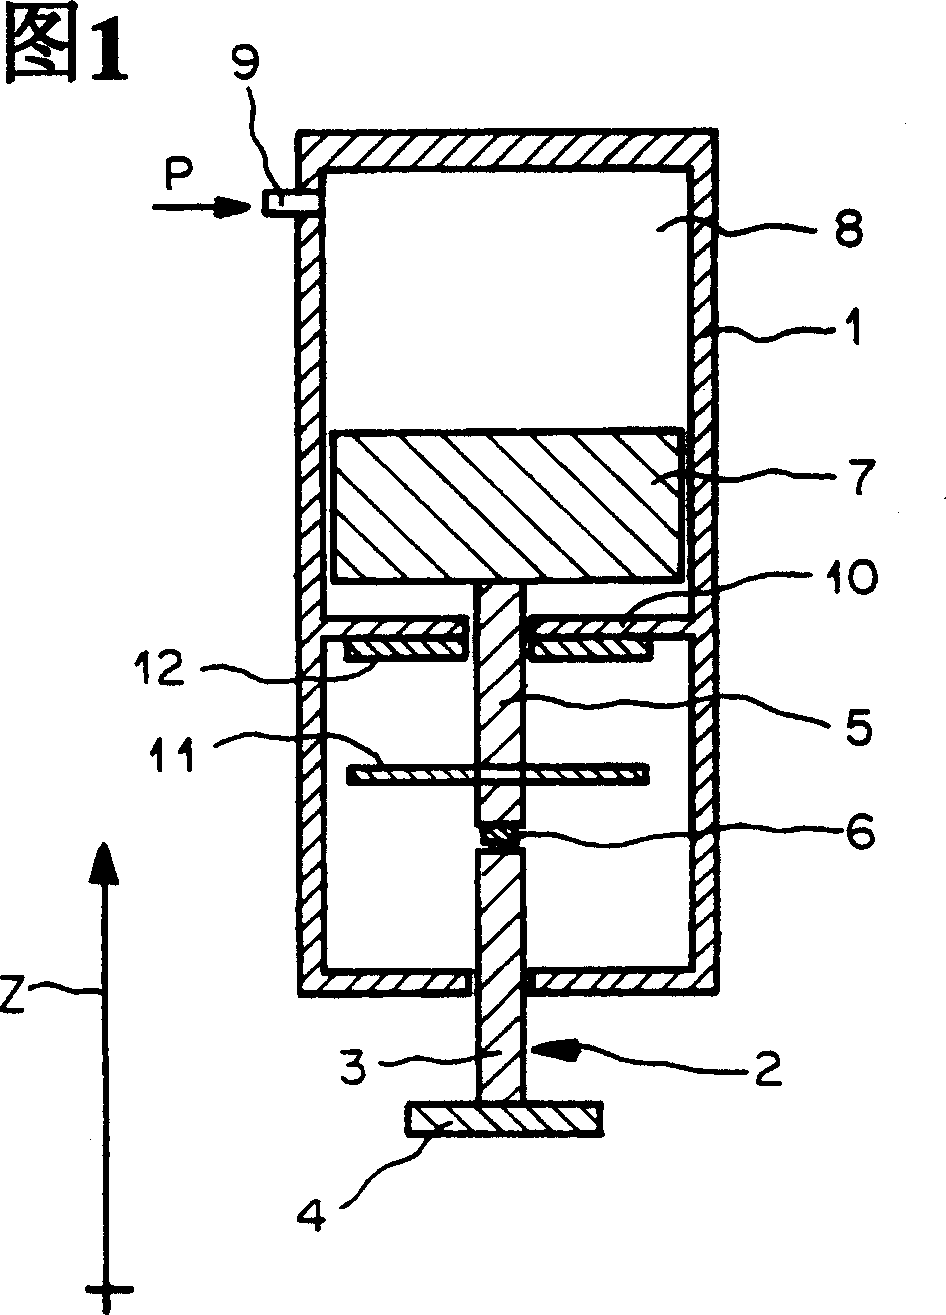 Method for picking semiconductor chips from a foil